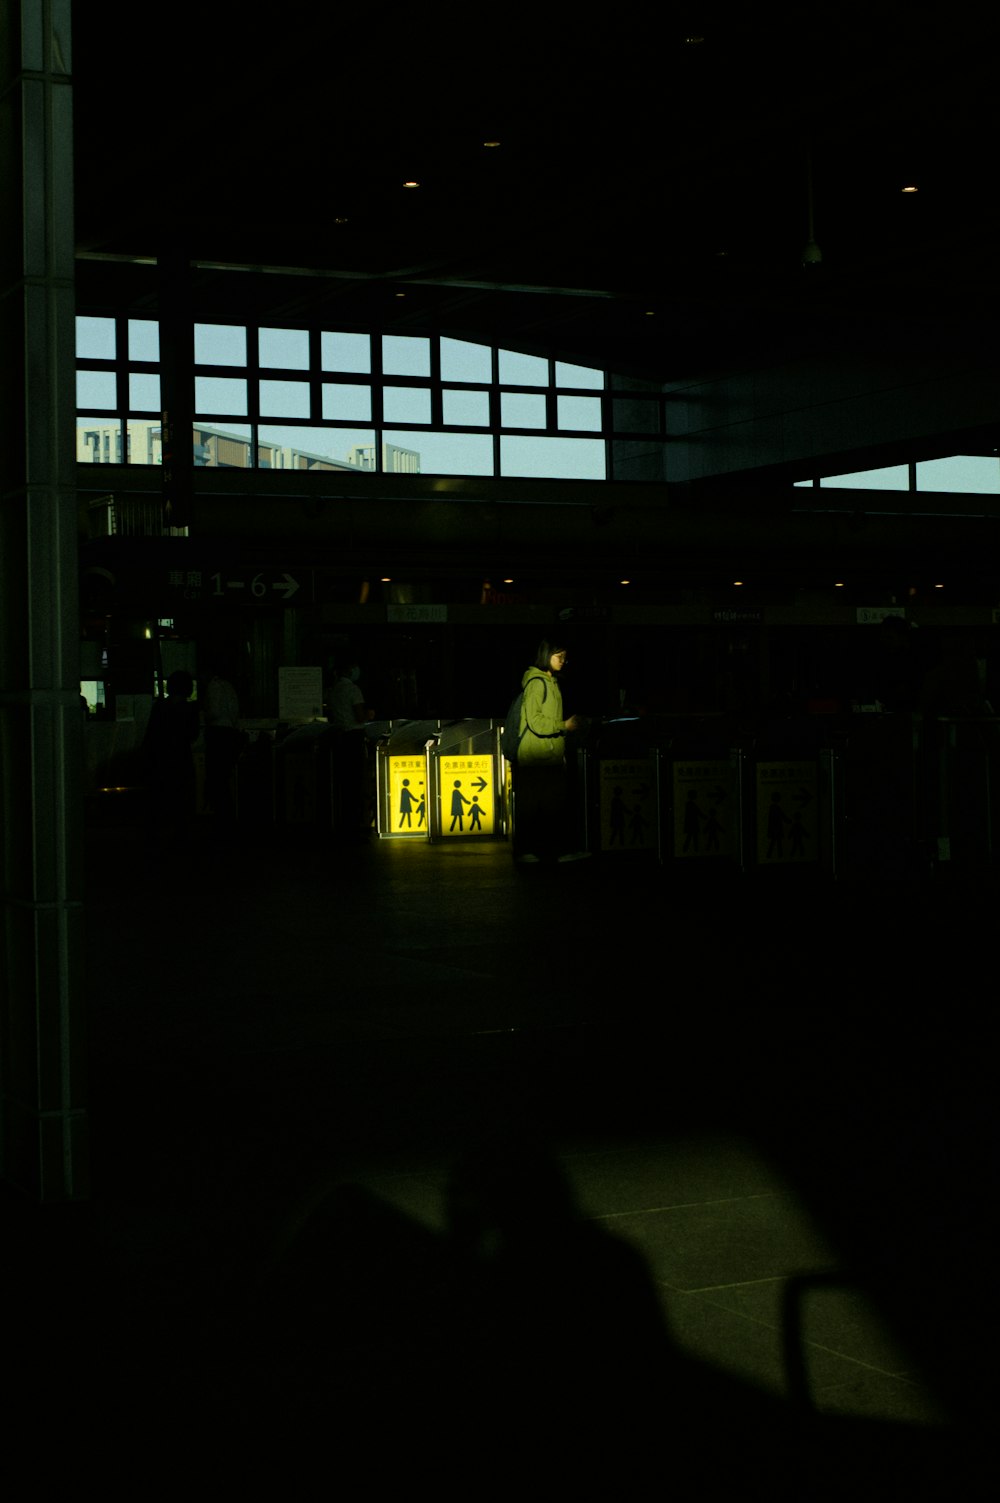 a man standing next to a yellow box in a dark room